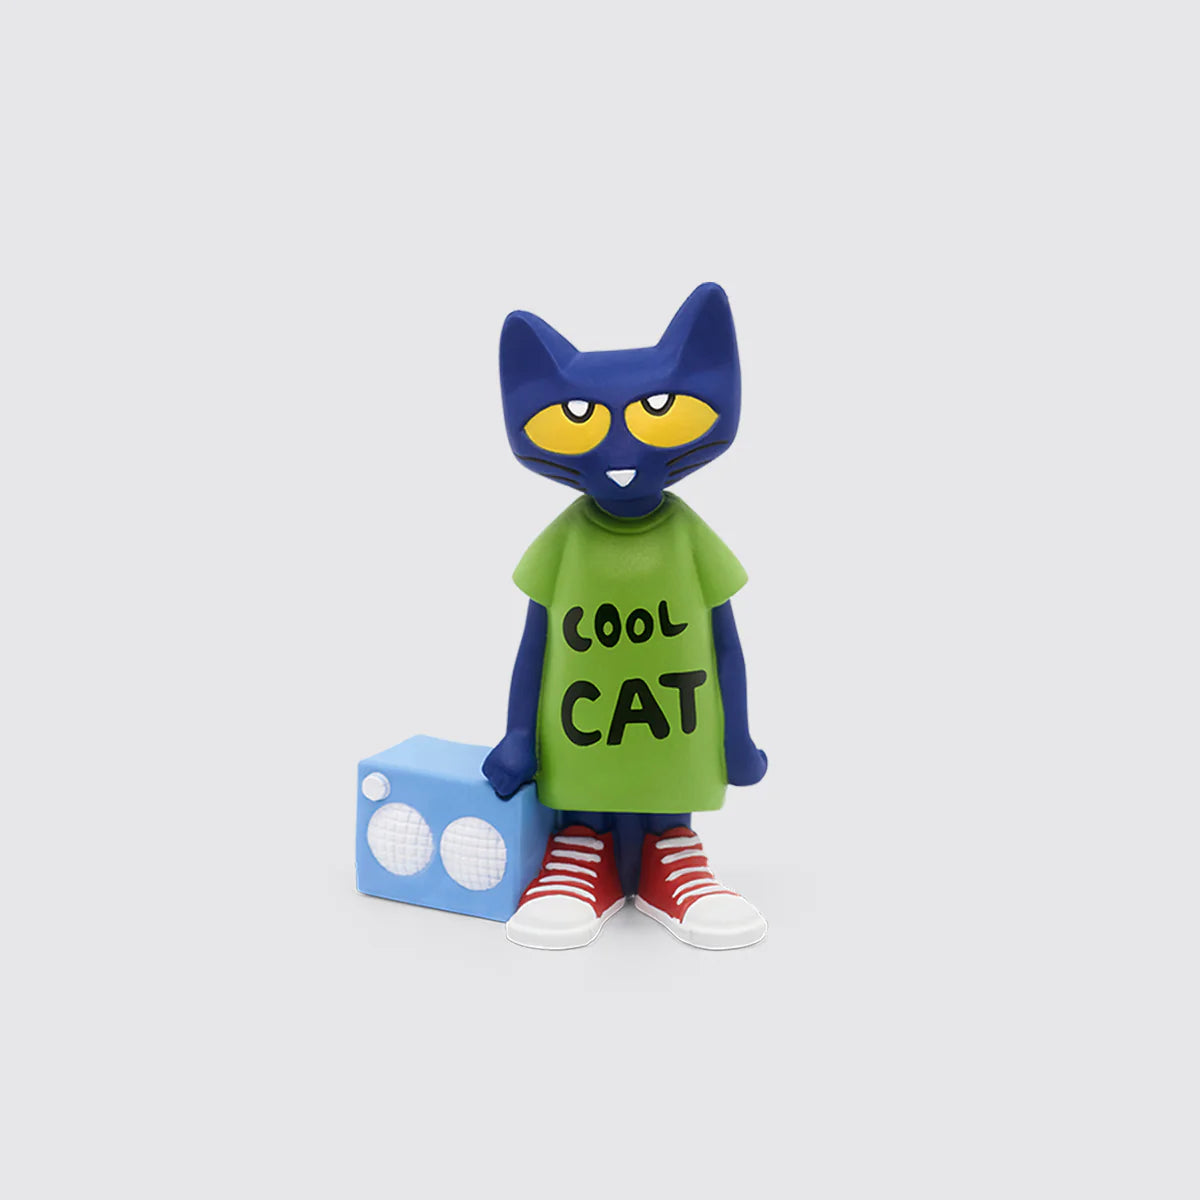 Tonies-Tonies Characters - Pete the Cat-10000780-Legacy Toys